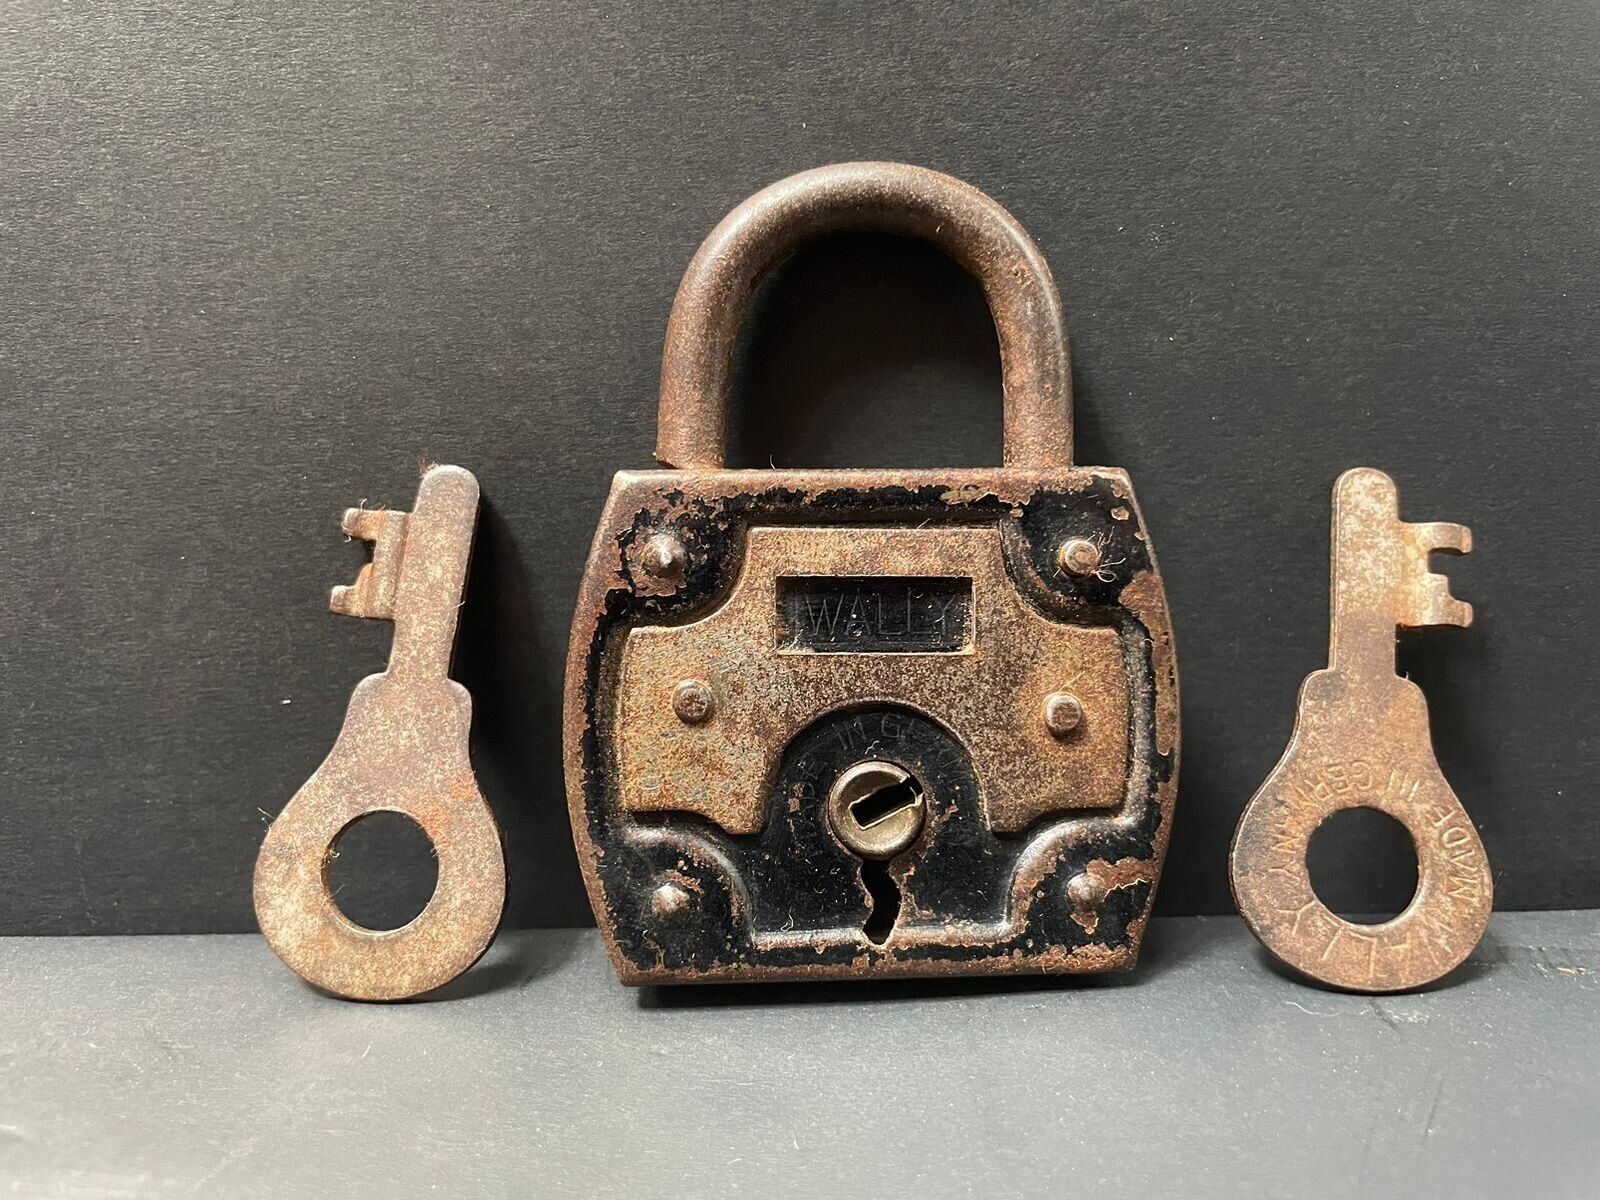 Old Vintage Rare Wally Rustic Iron Padlock With 2 Original Keys, Made In Germany